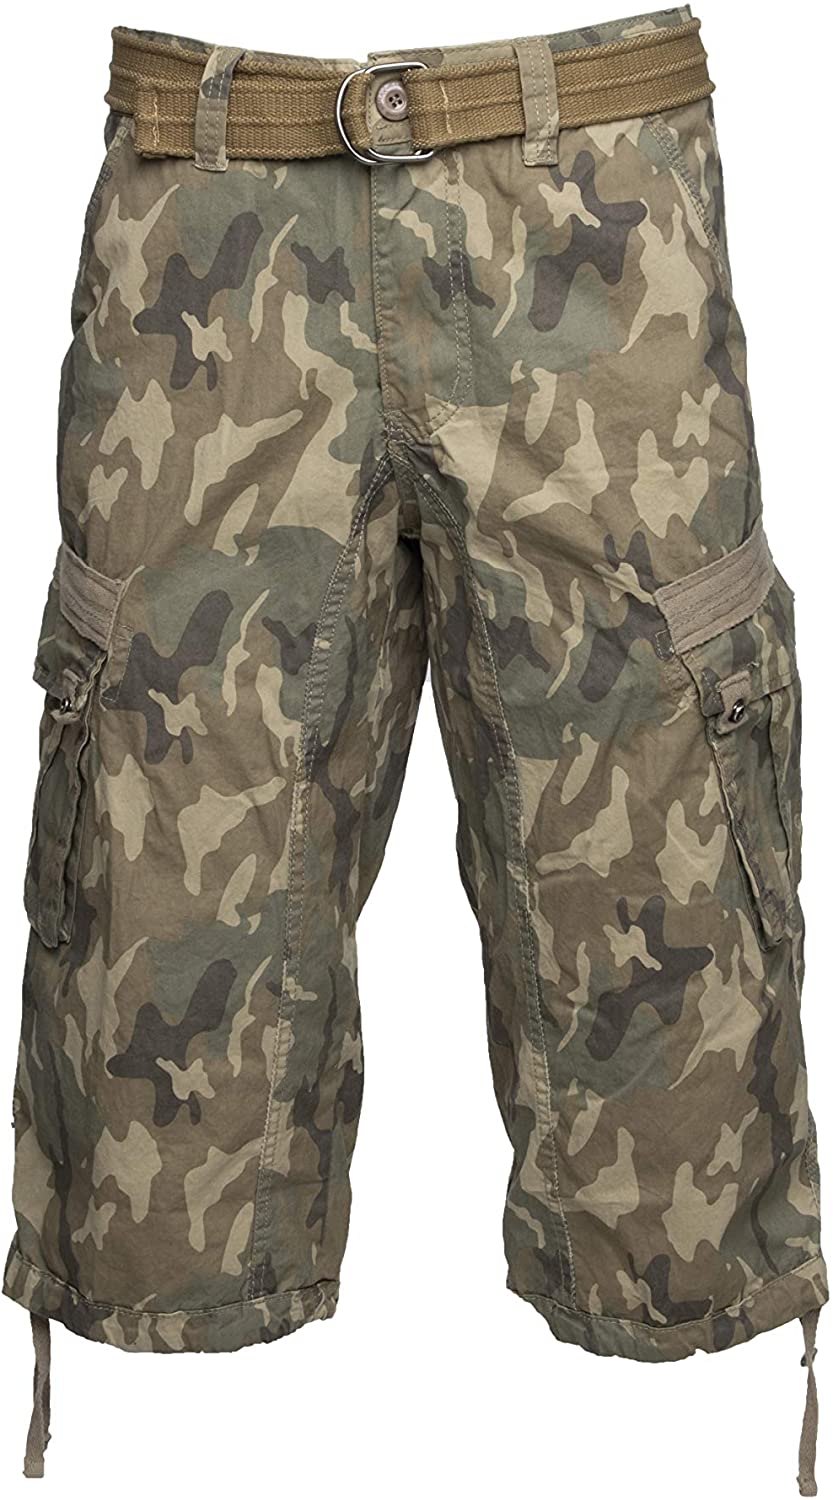 adviicd Workout Shorts Men's Belted Tactical Cargo Long Shorts Inseam Below  Knee Length Multi Pocket Pants Mens Shorts 